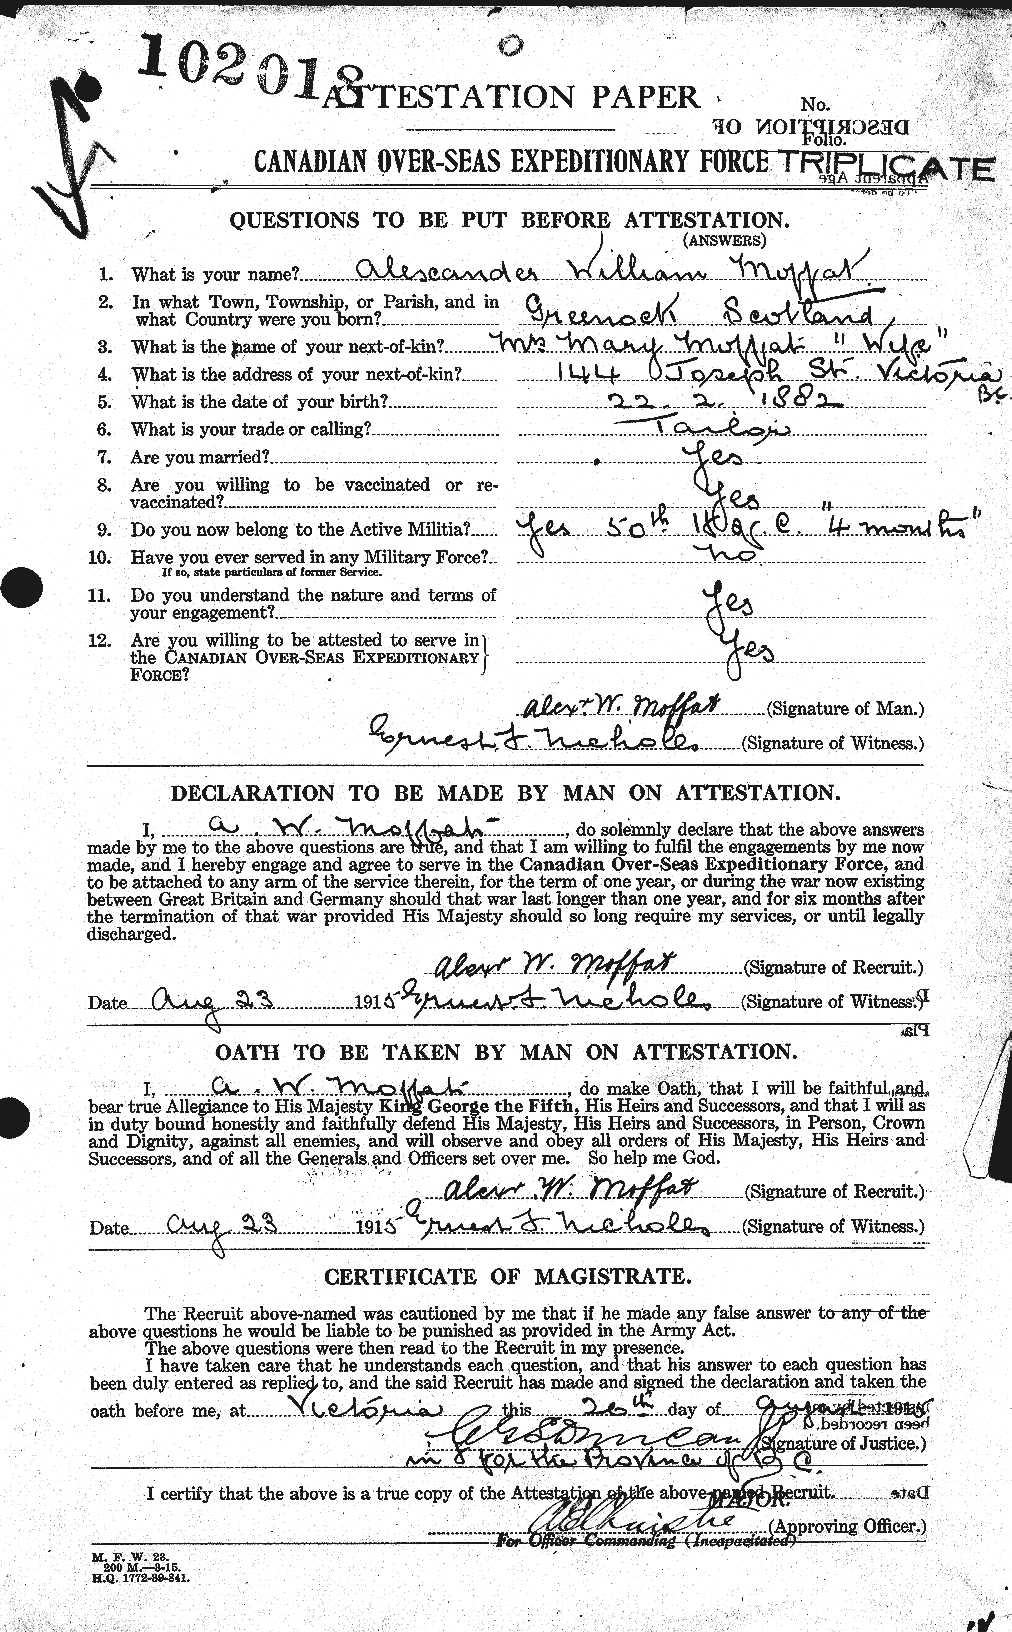 Personnel Records of the First World War - CEF 498998a